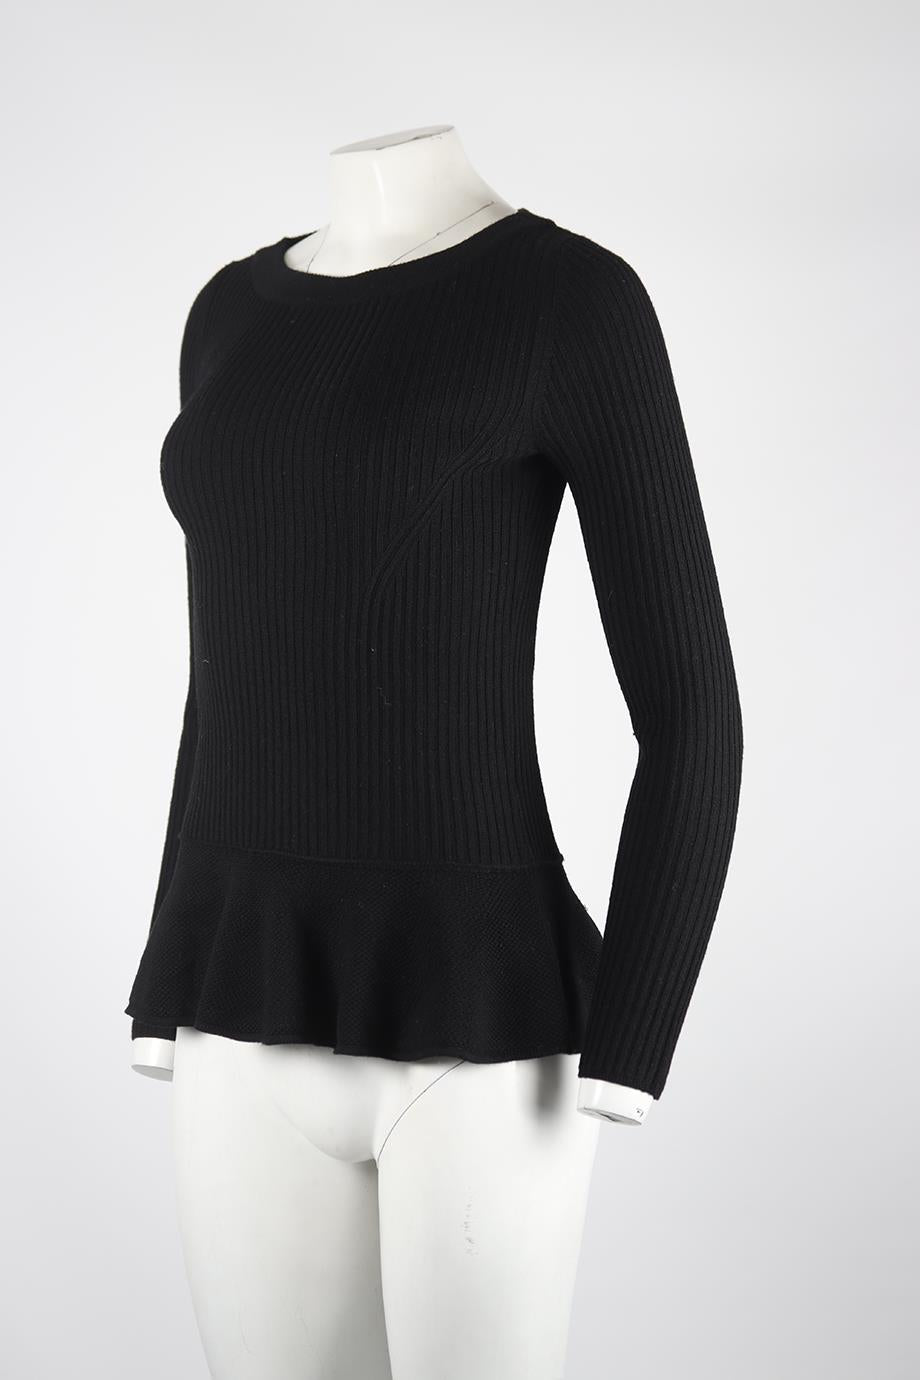 TORY BURCH RIBBED WOOL SWEATER SMALL